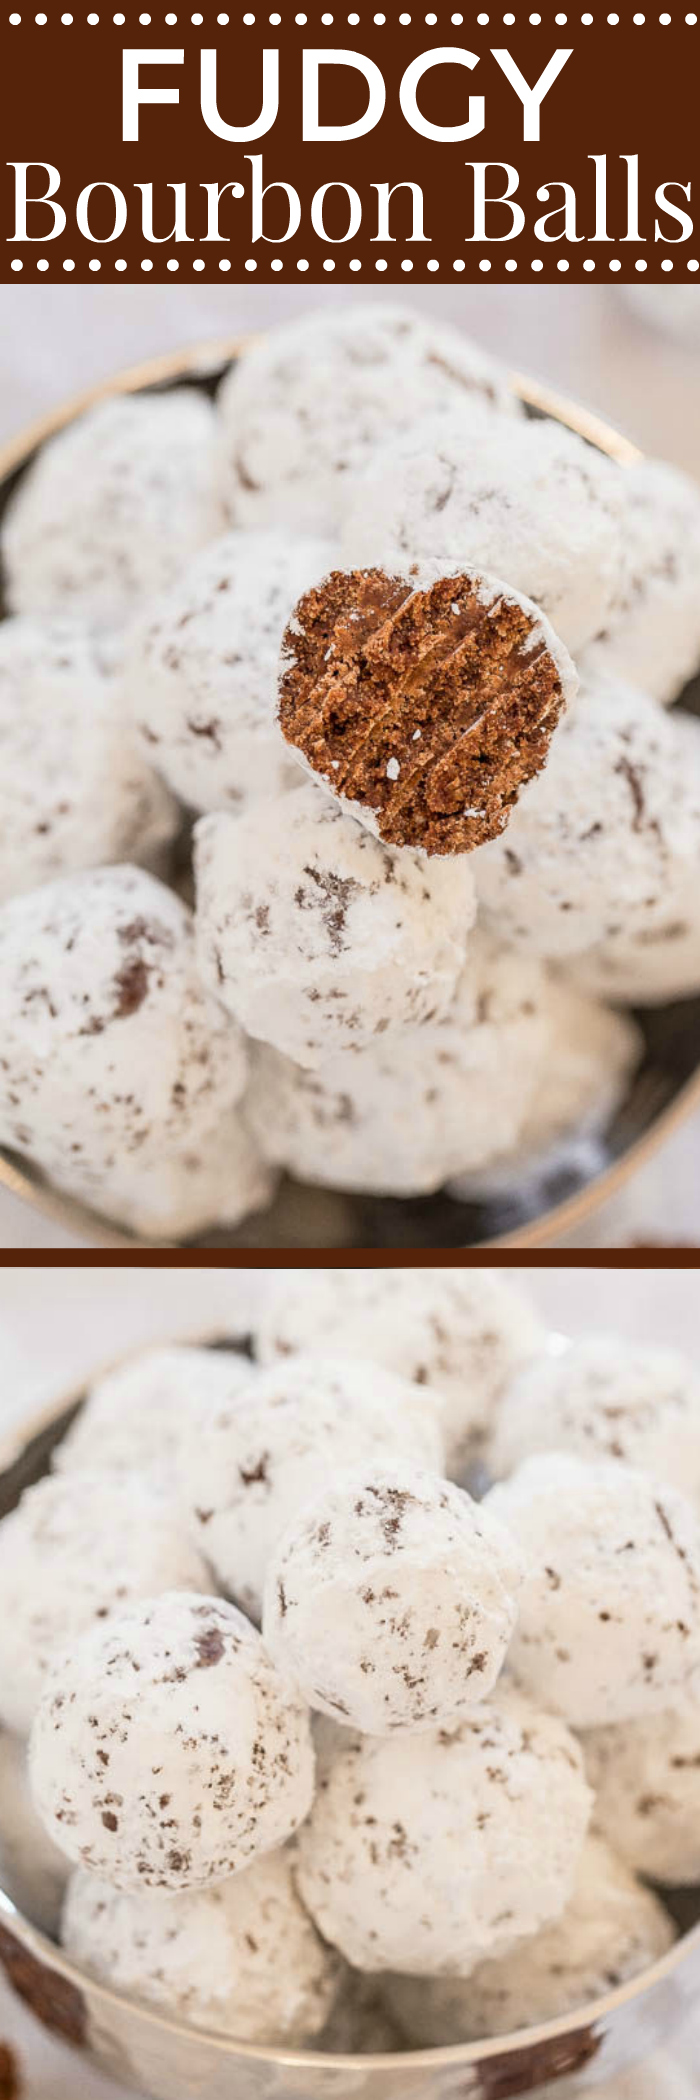 Fudgy Bourbon Balls - Easy, no-bake, ready in 15 minutes, soft, chewy, and fudgy!! SUGAR and BOOZE all in one bite-sized treat! Great for hostess gifts, holiday parties, and cookie exchanges!!